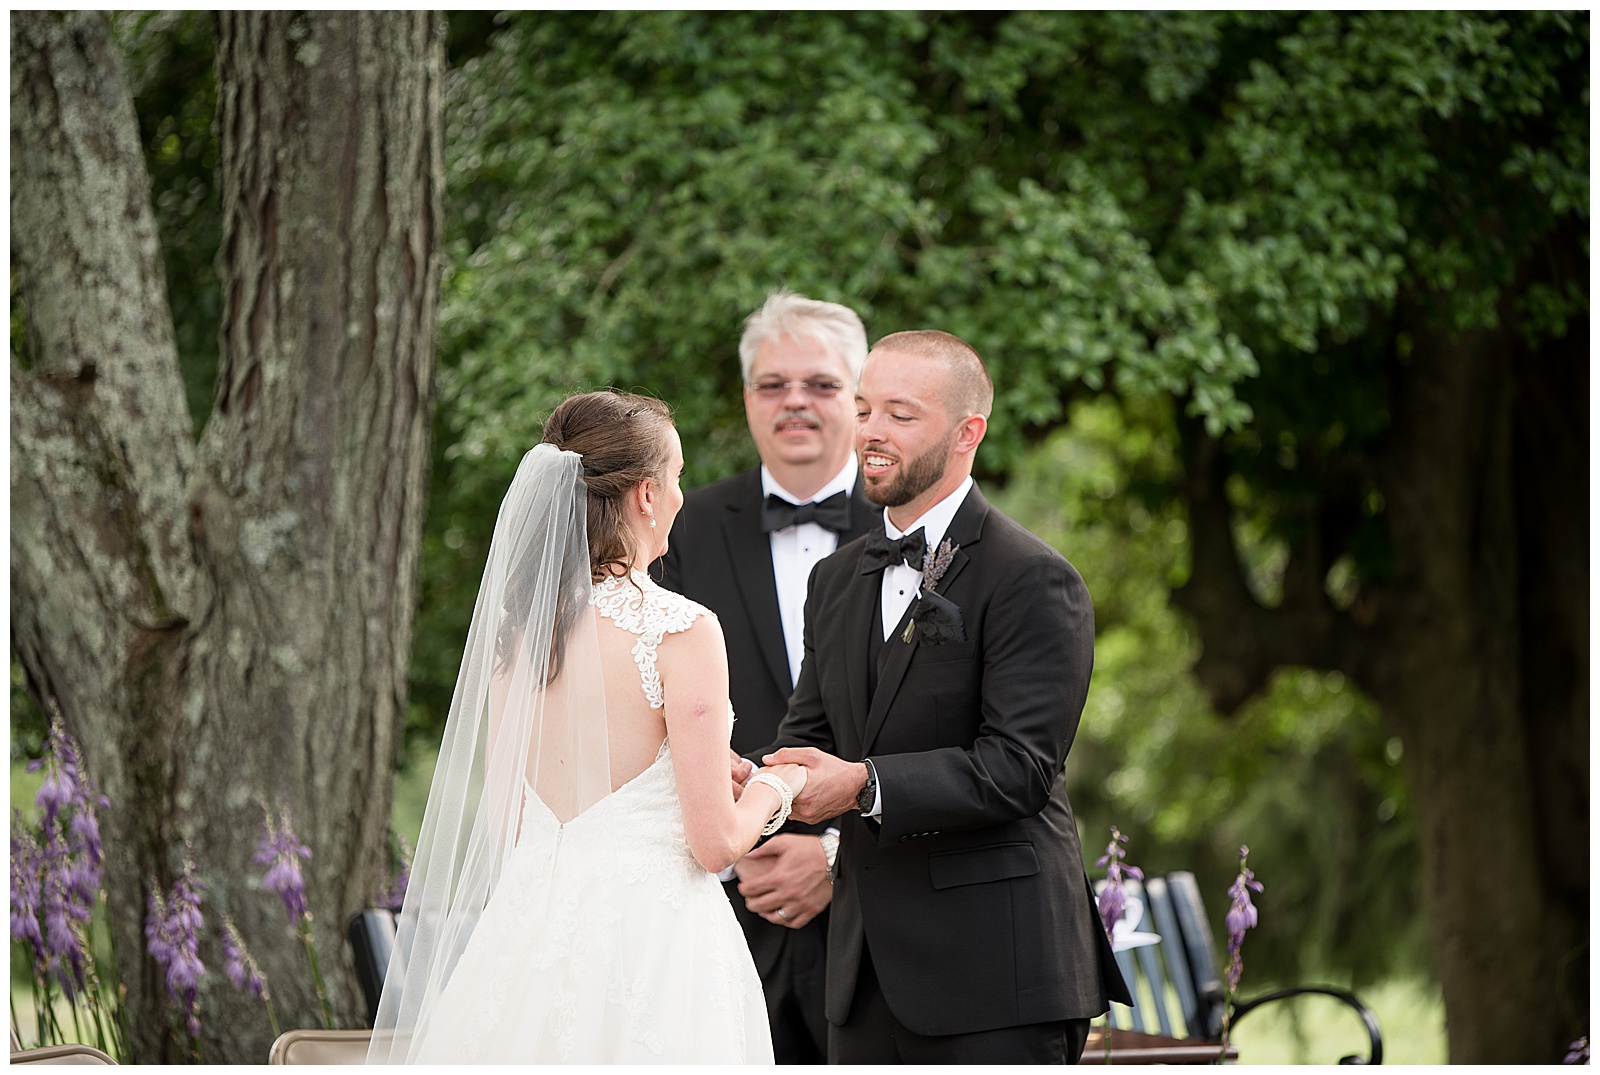 couple exchanging vows at intimate wedding ceremony